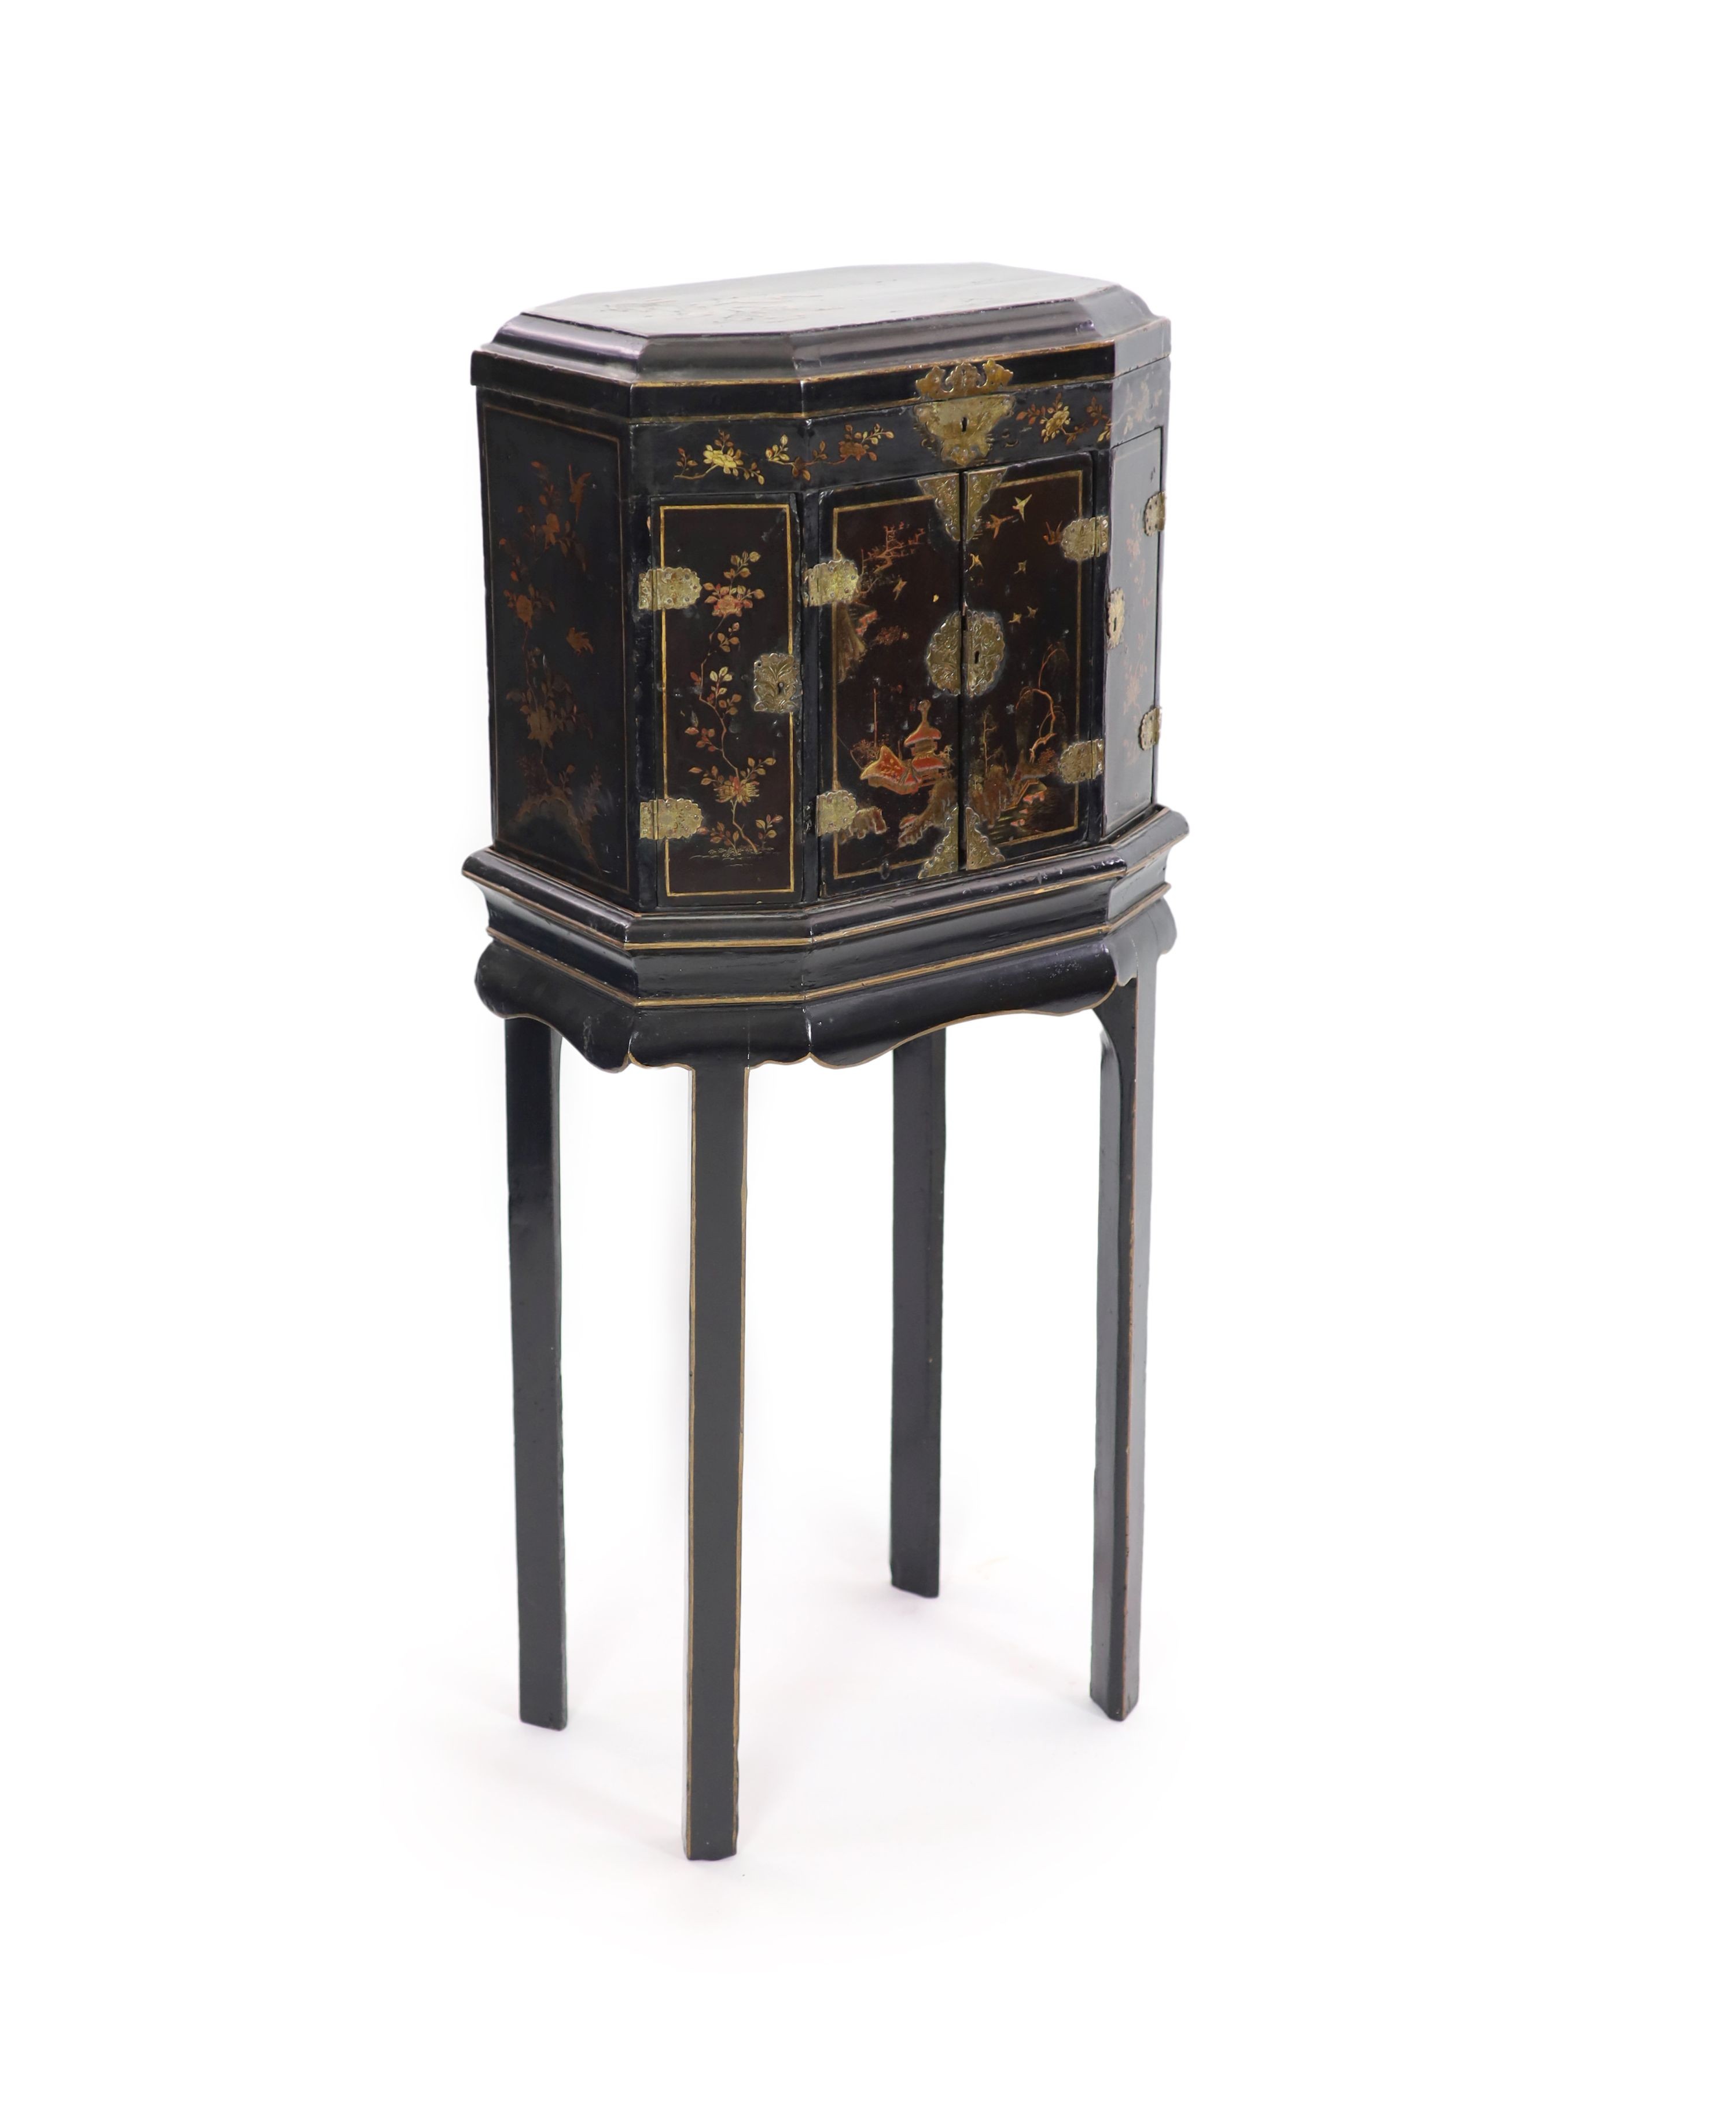 An 18th century Japanese black lacquered table cabinet on stand H 123cm. W 56cm. D 38cm.